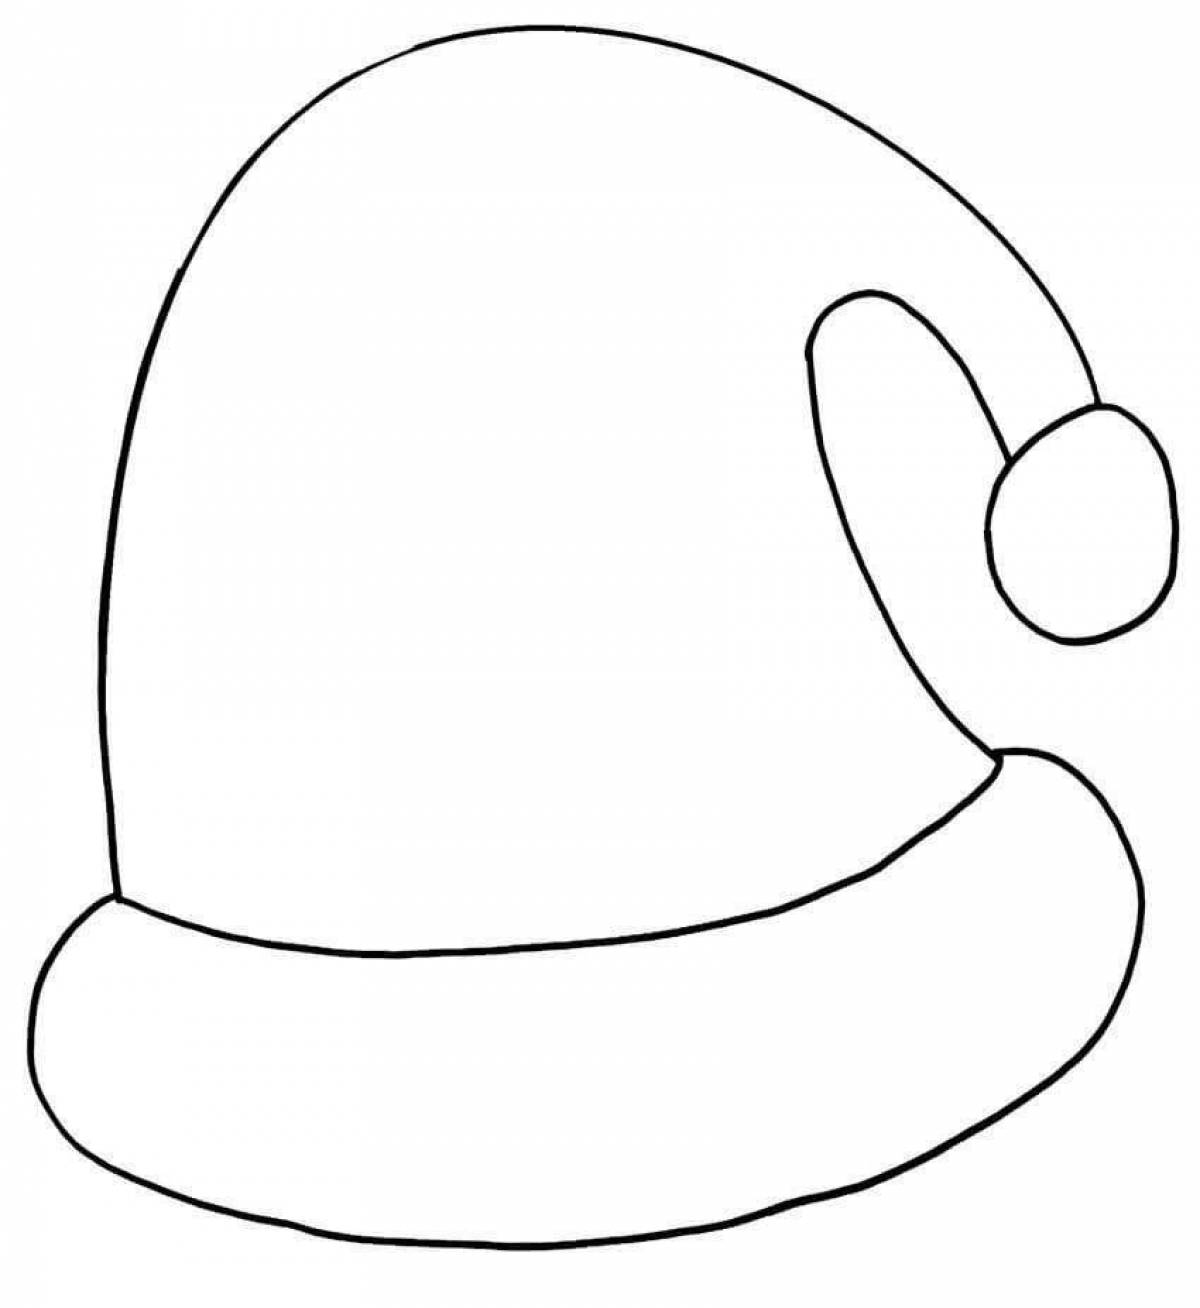 Coloring page sweet christmas hat